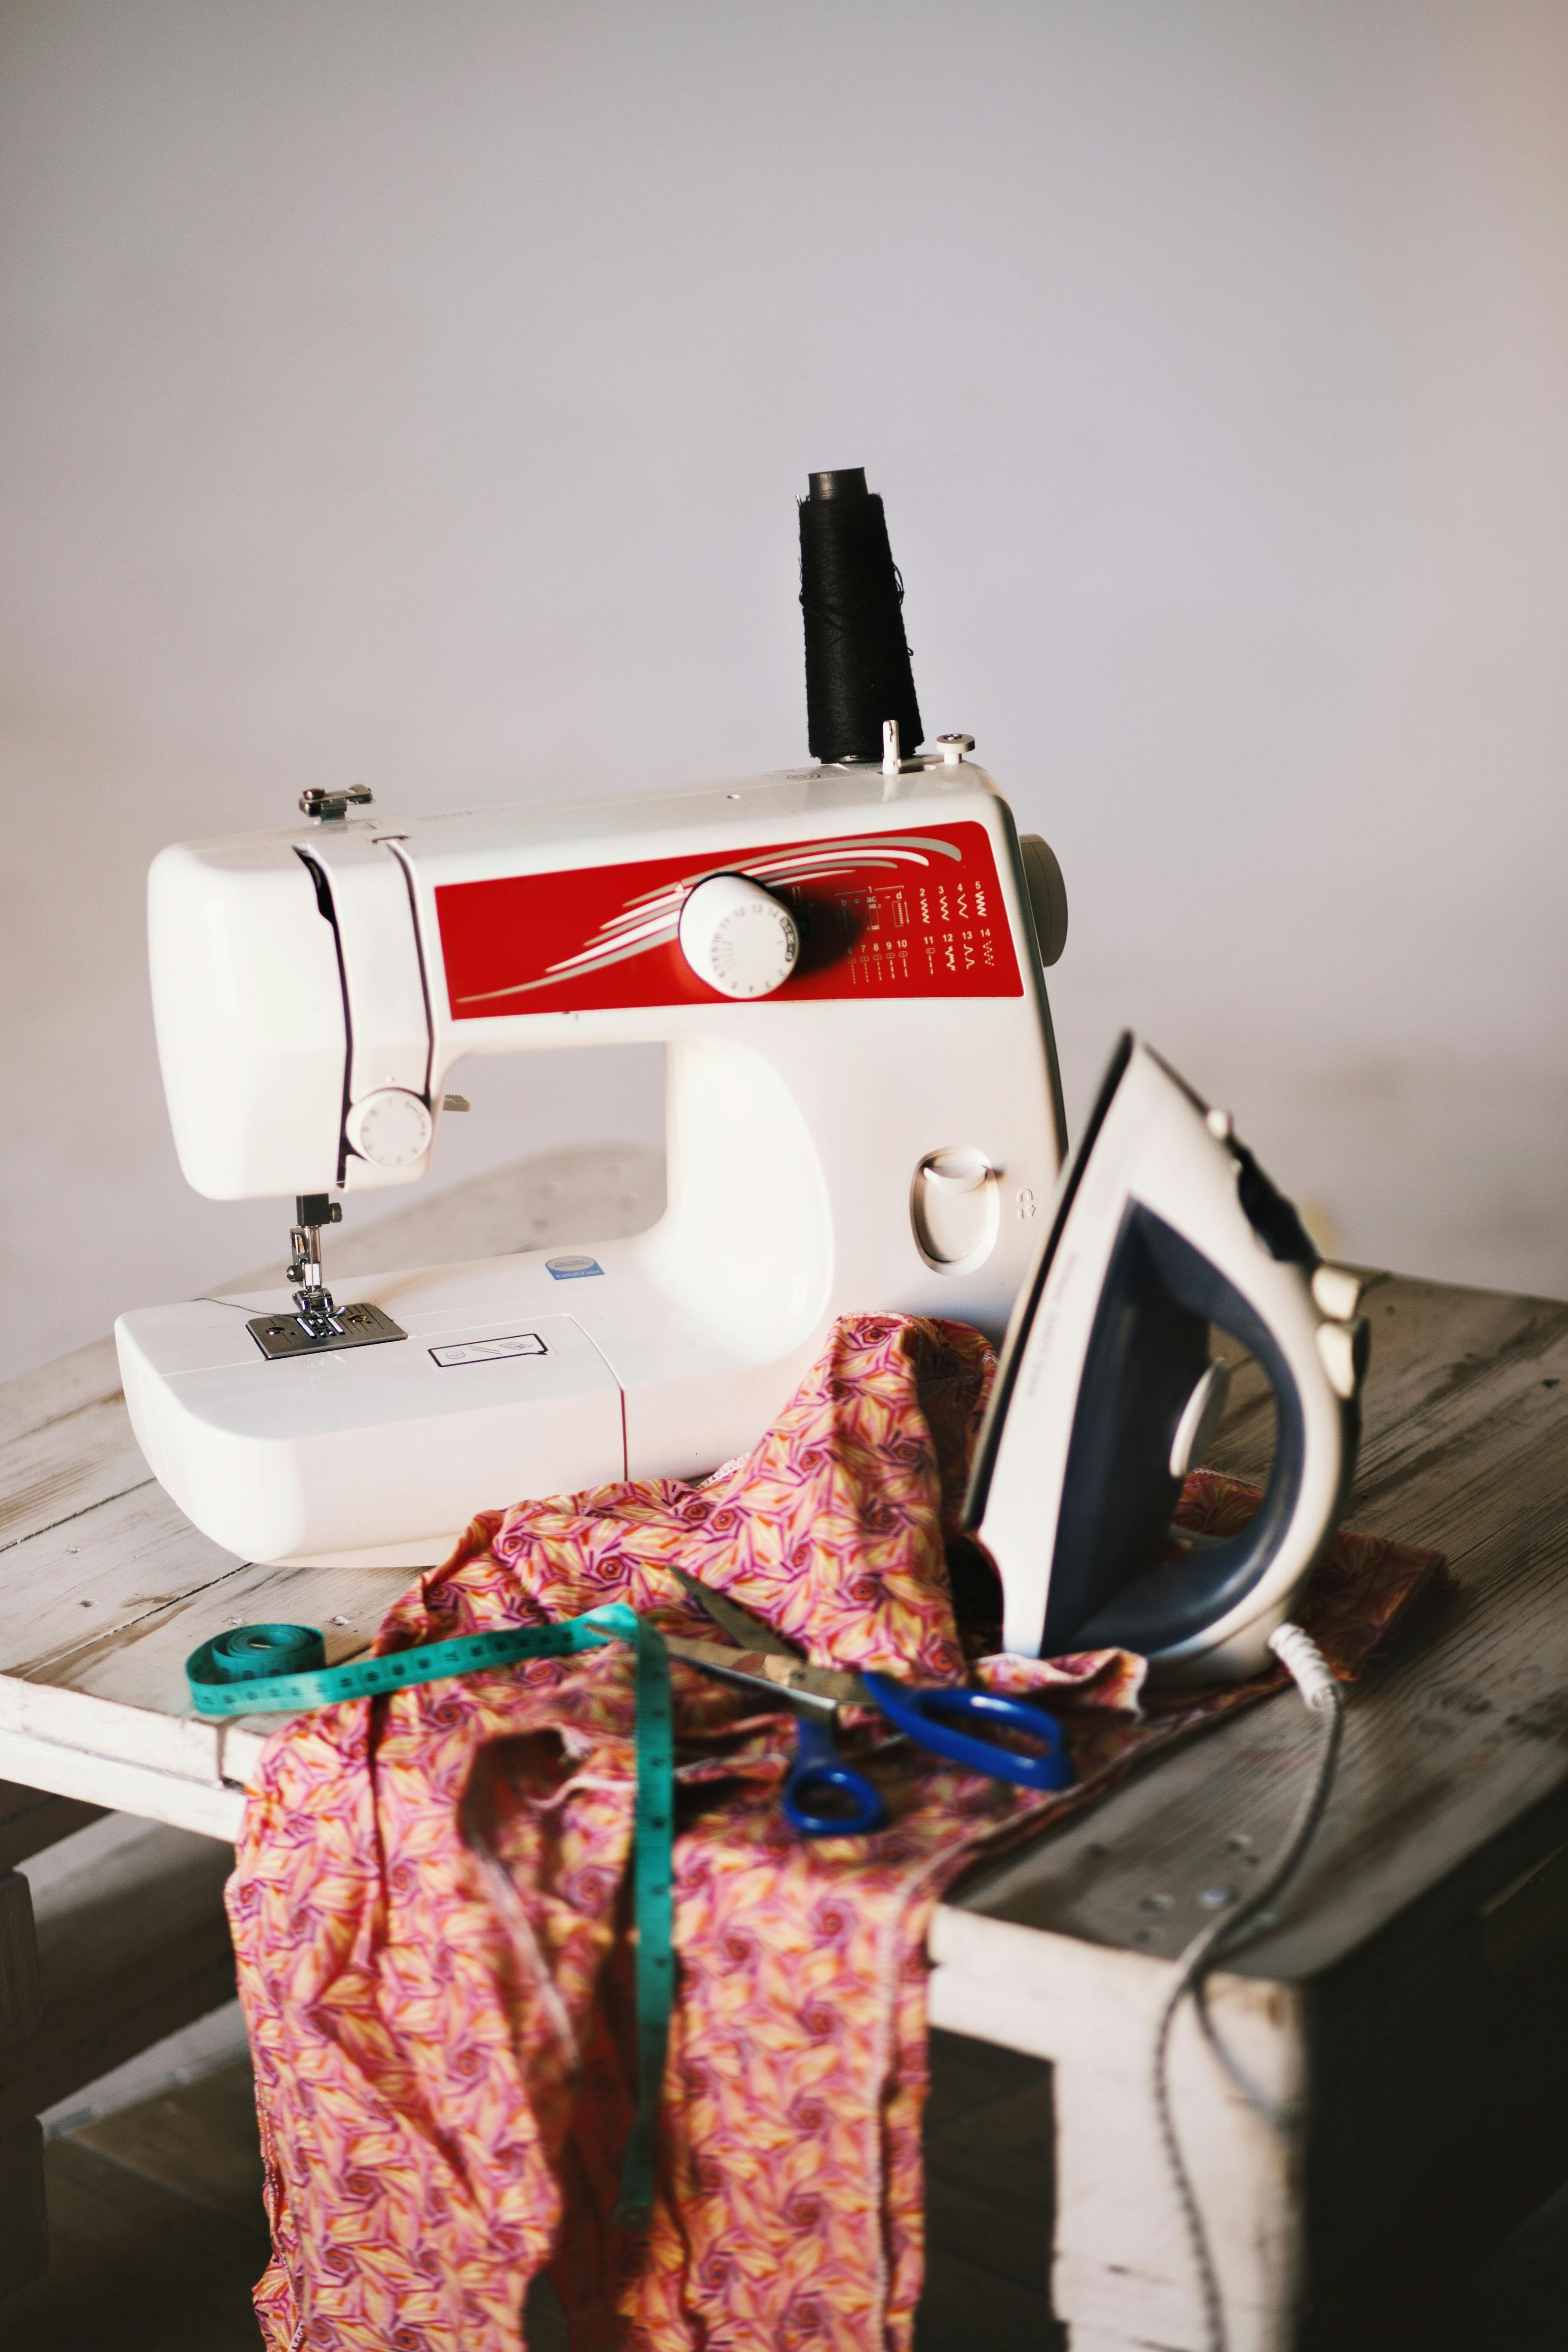 Image of sewing machine on a table with an iron and some clothes